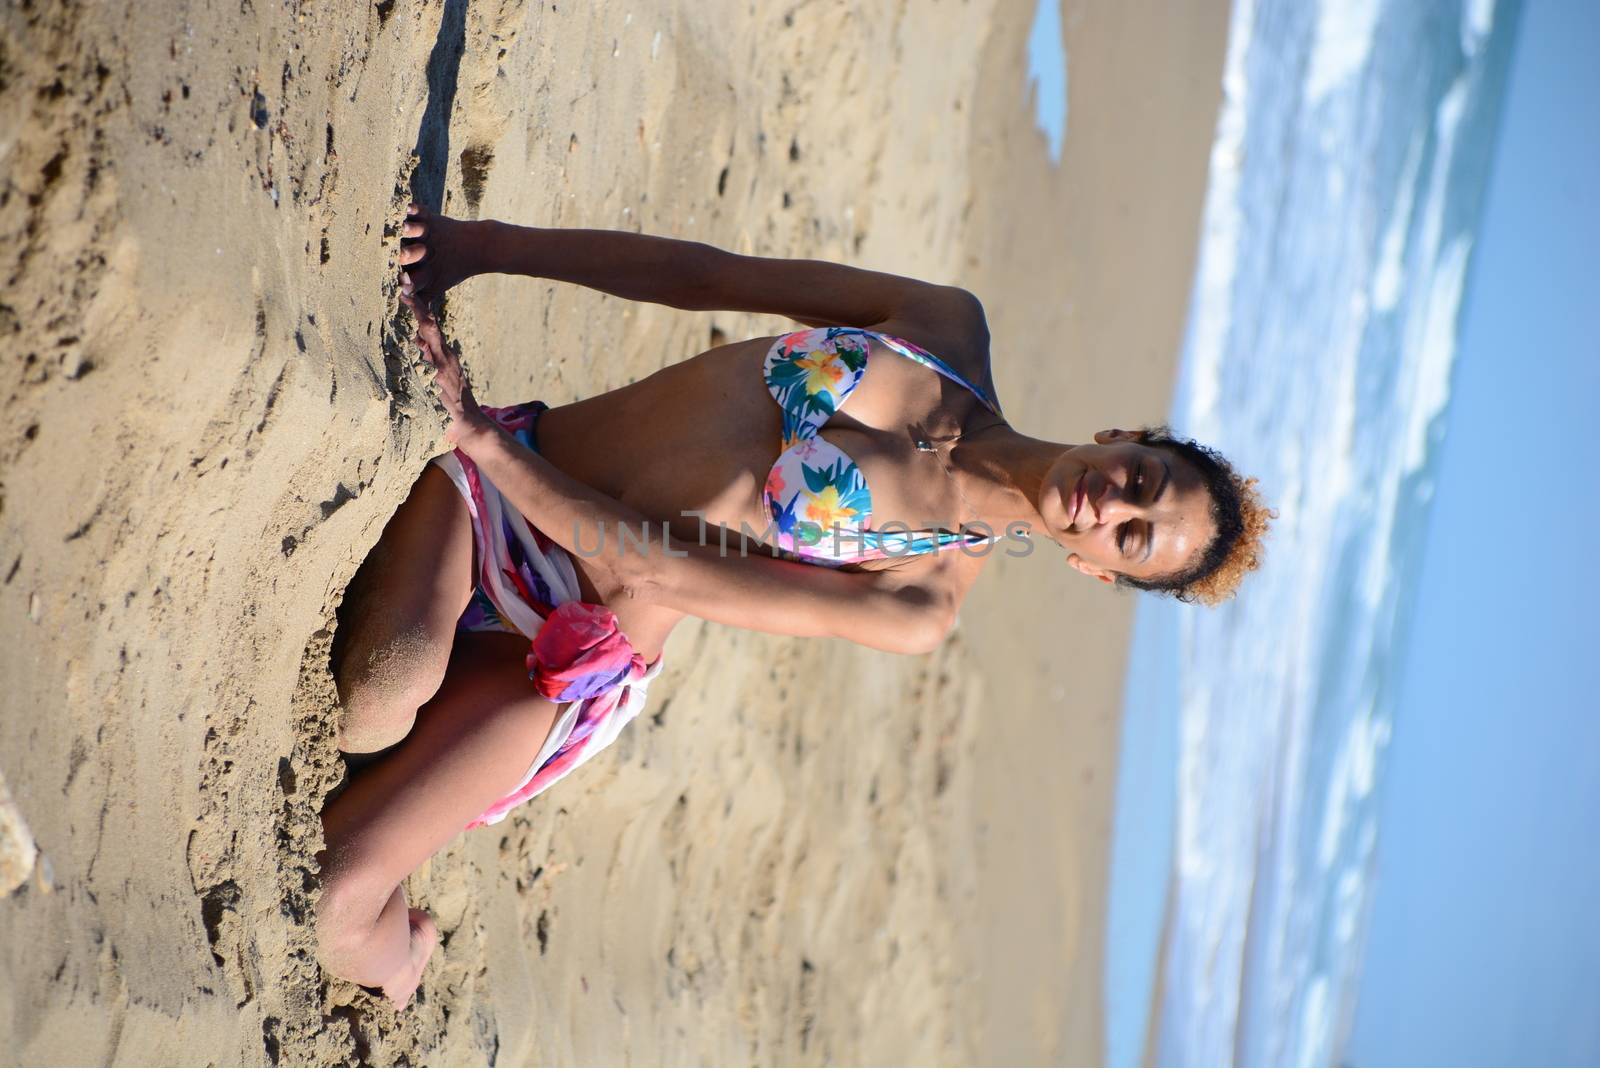 Photo shoot on the beach of a middle-aged woman in a sunny day